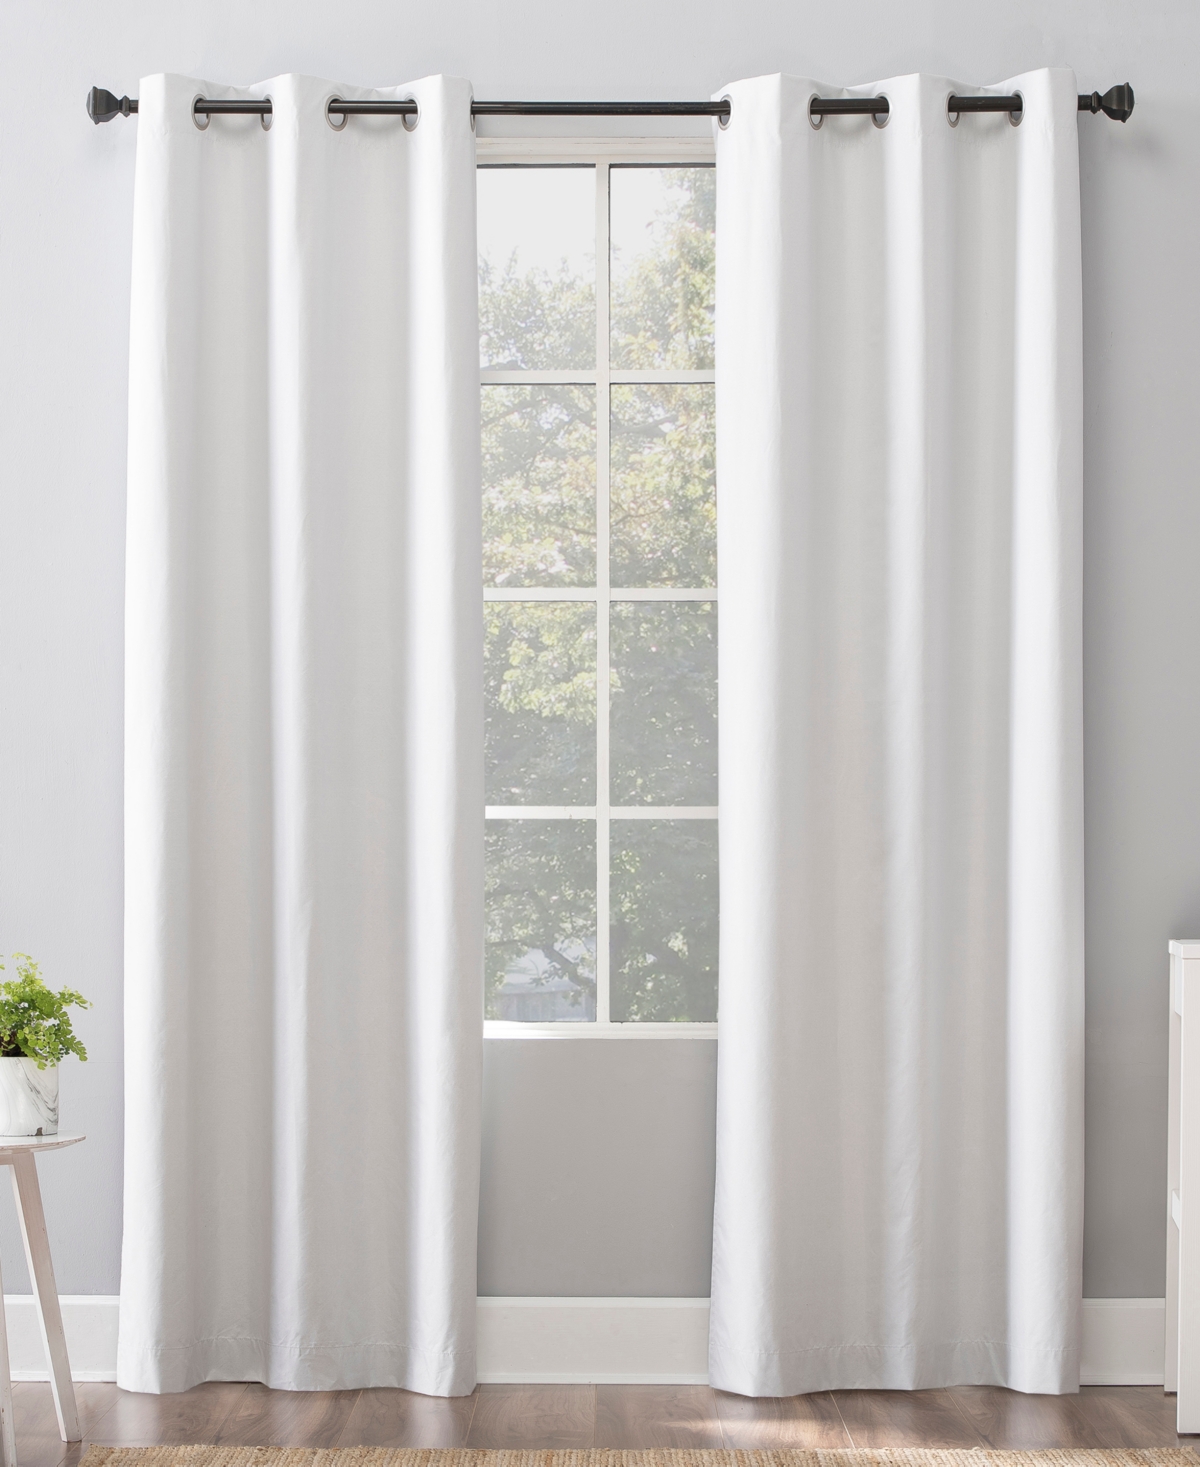 Sun Zero Cyrus Thermal Blackout Grommet Curtain Panel, 84" L X 40" W In Winter White